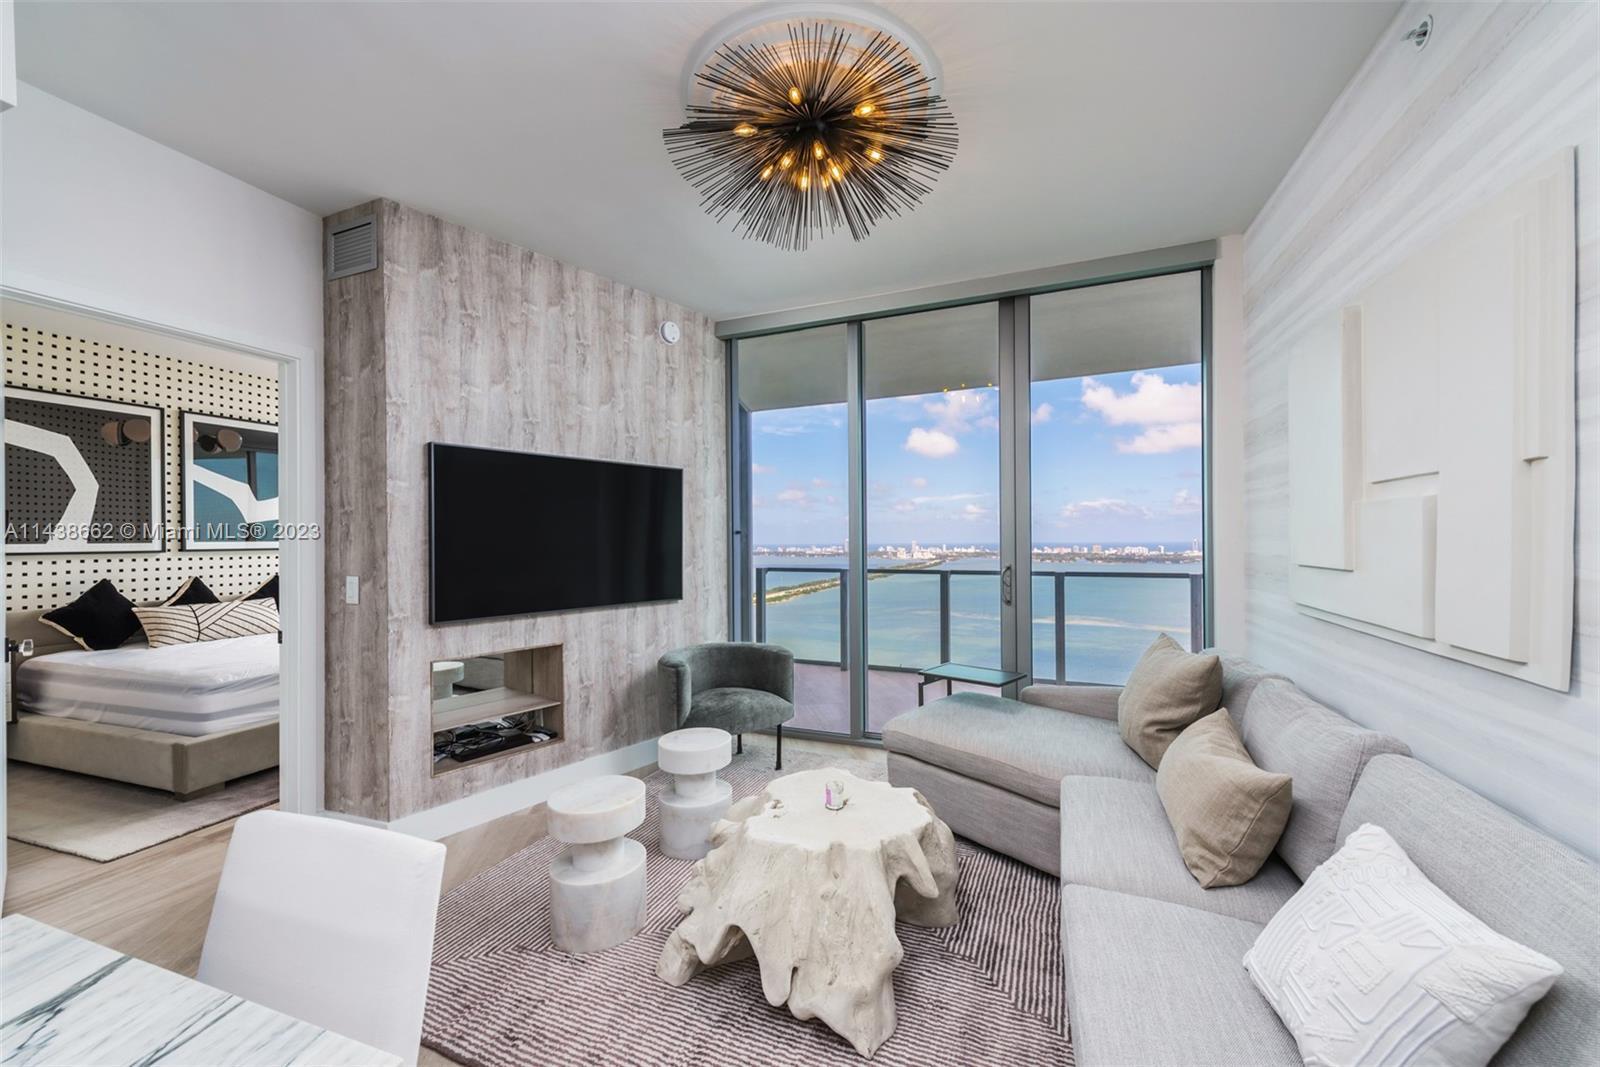 The most beautiful professionally designed & furnished 2 Bedroom Bayfront residence at Biscayne Beac